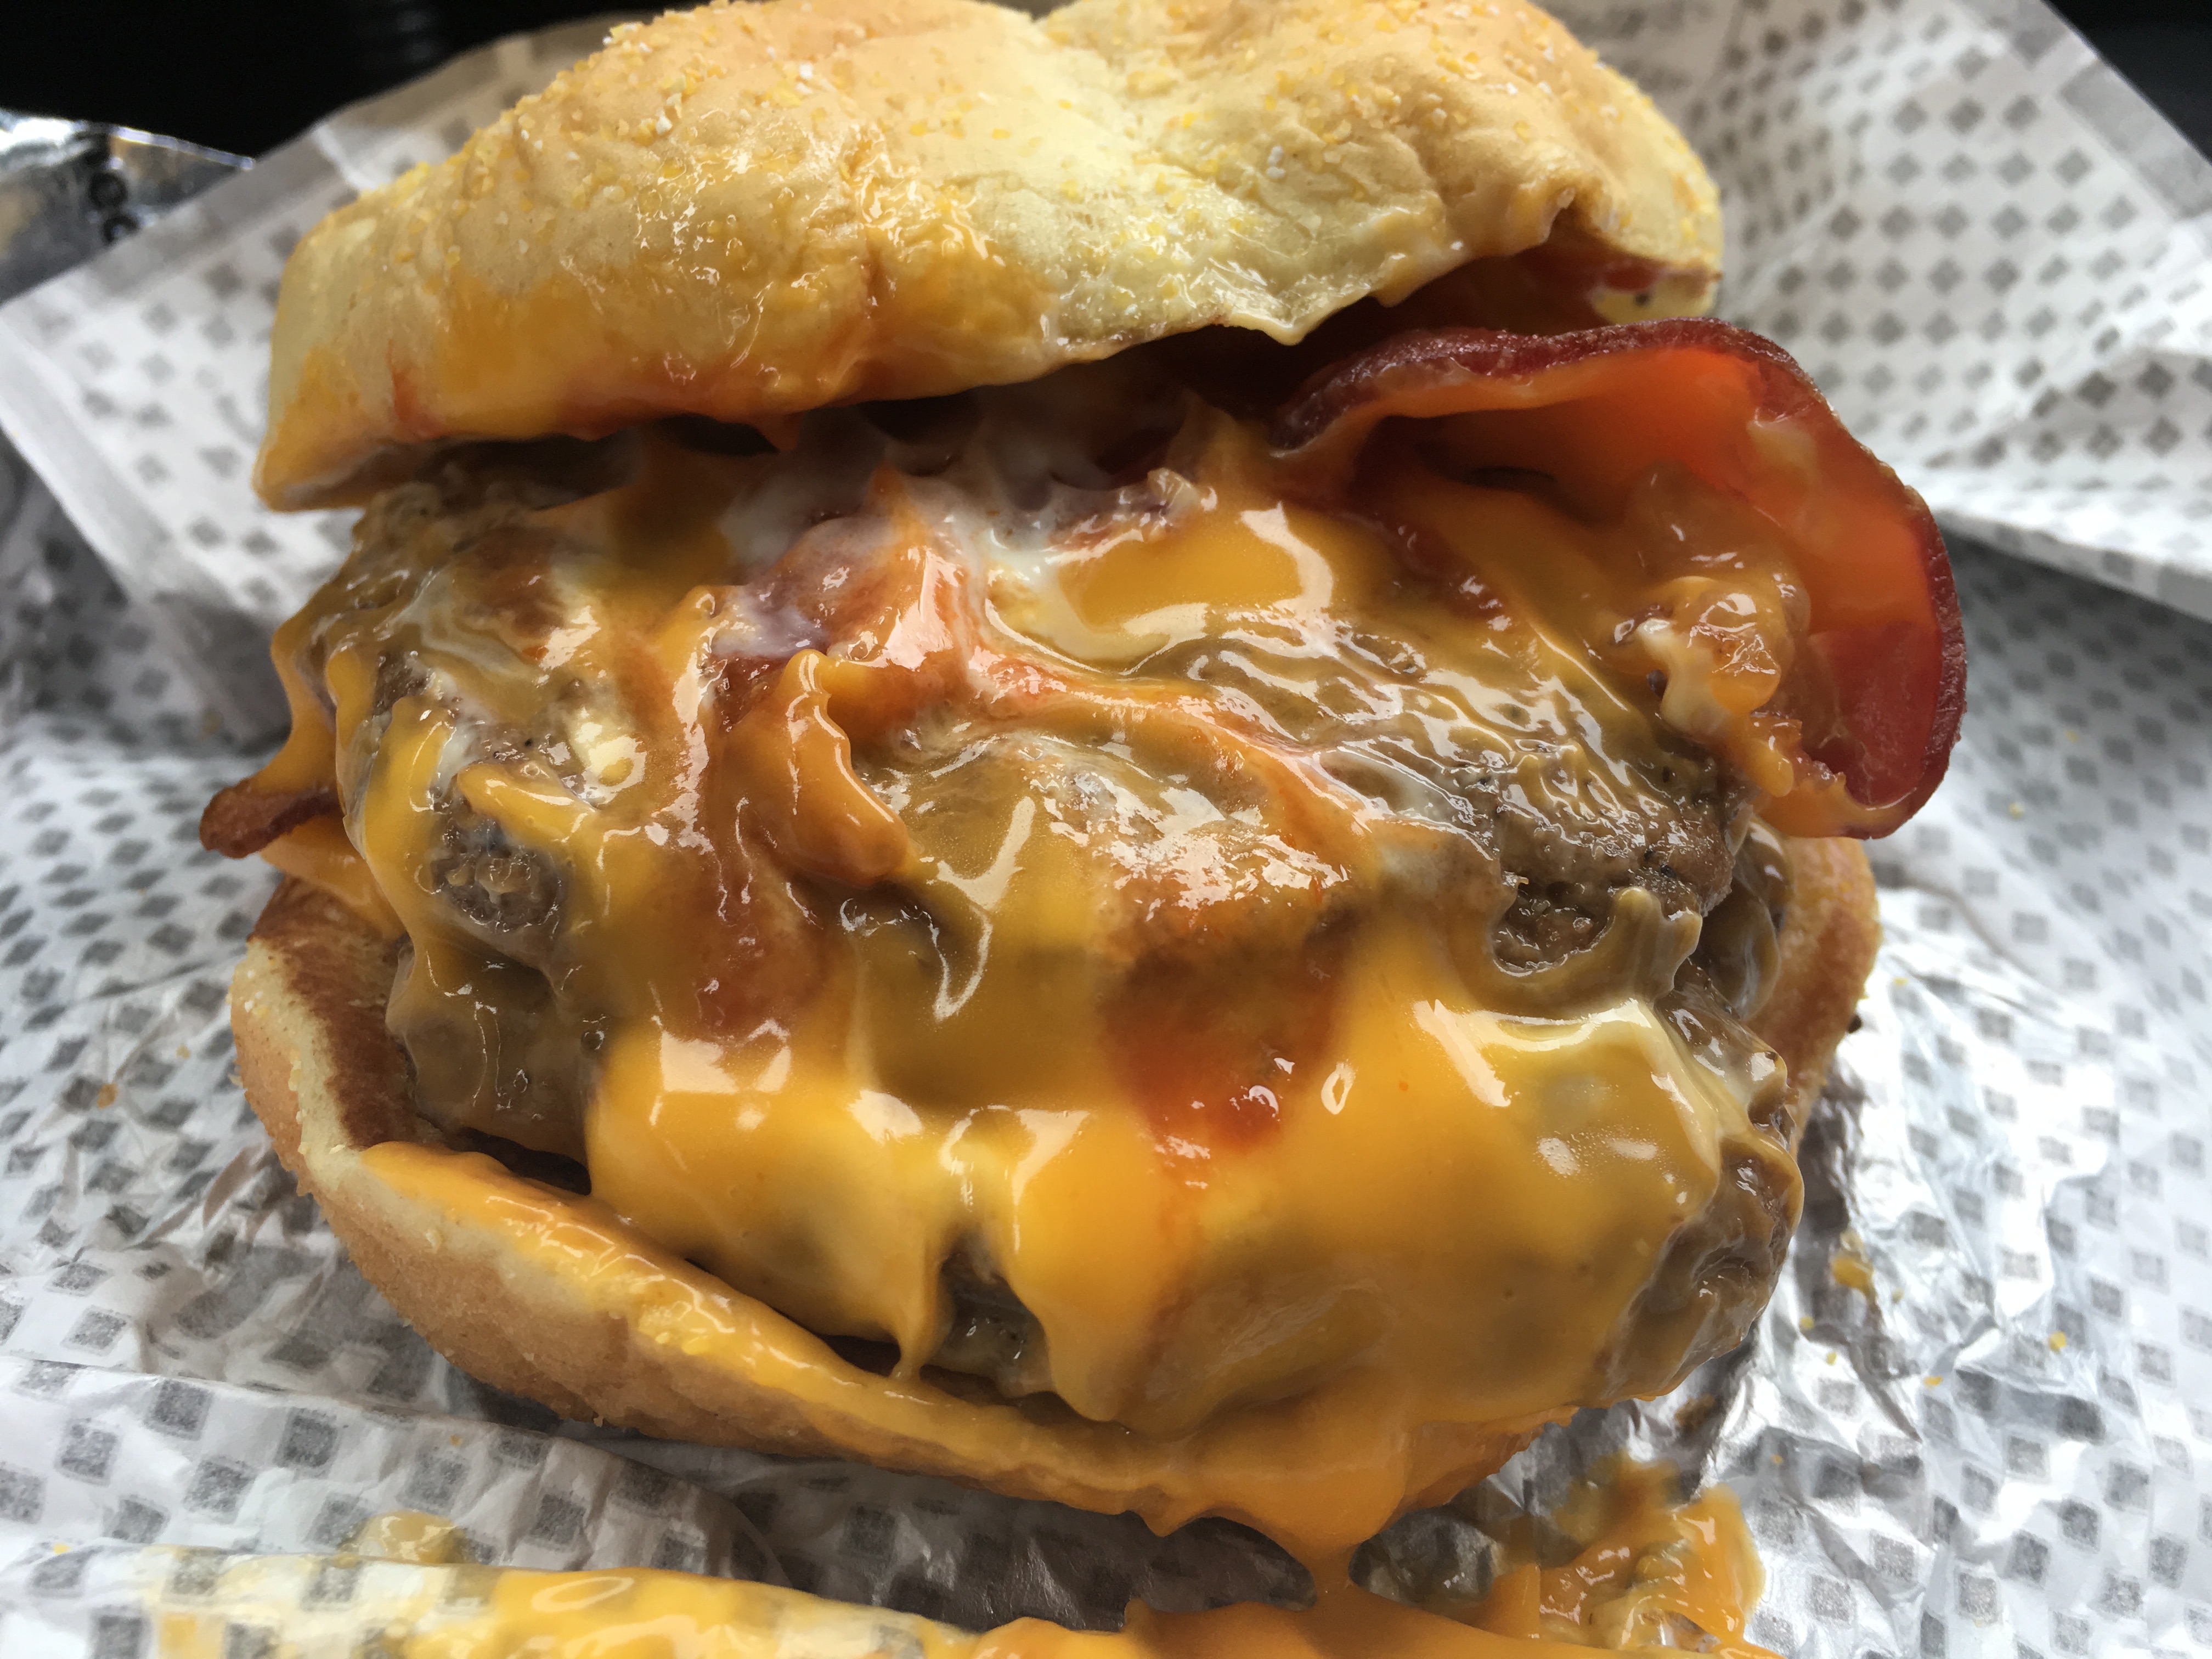 Fast Food Bacon Burgers Ranked Worst To Best